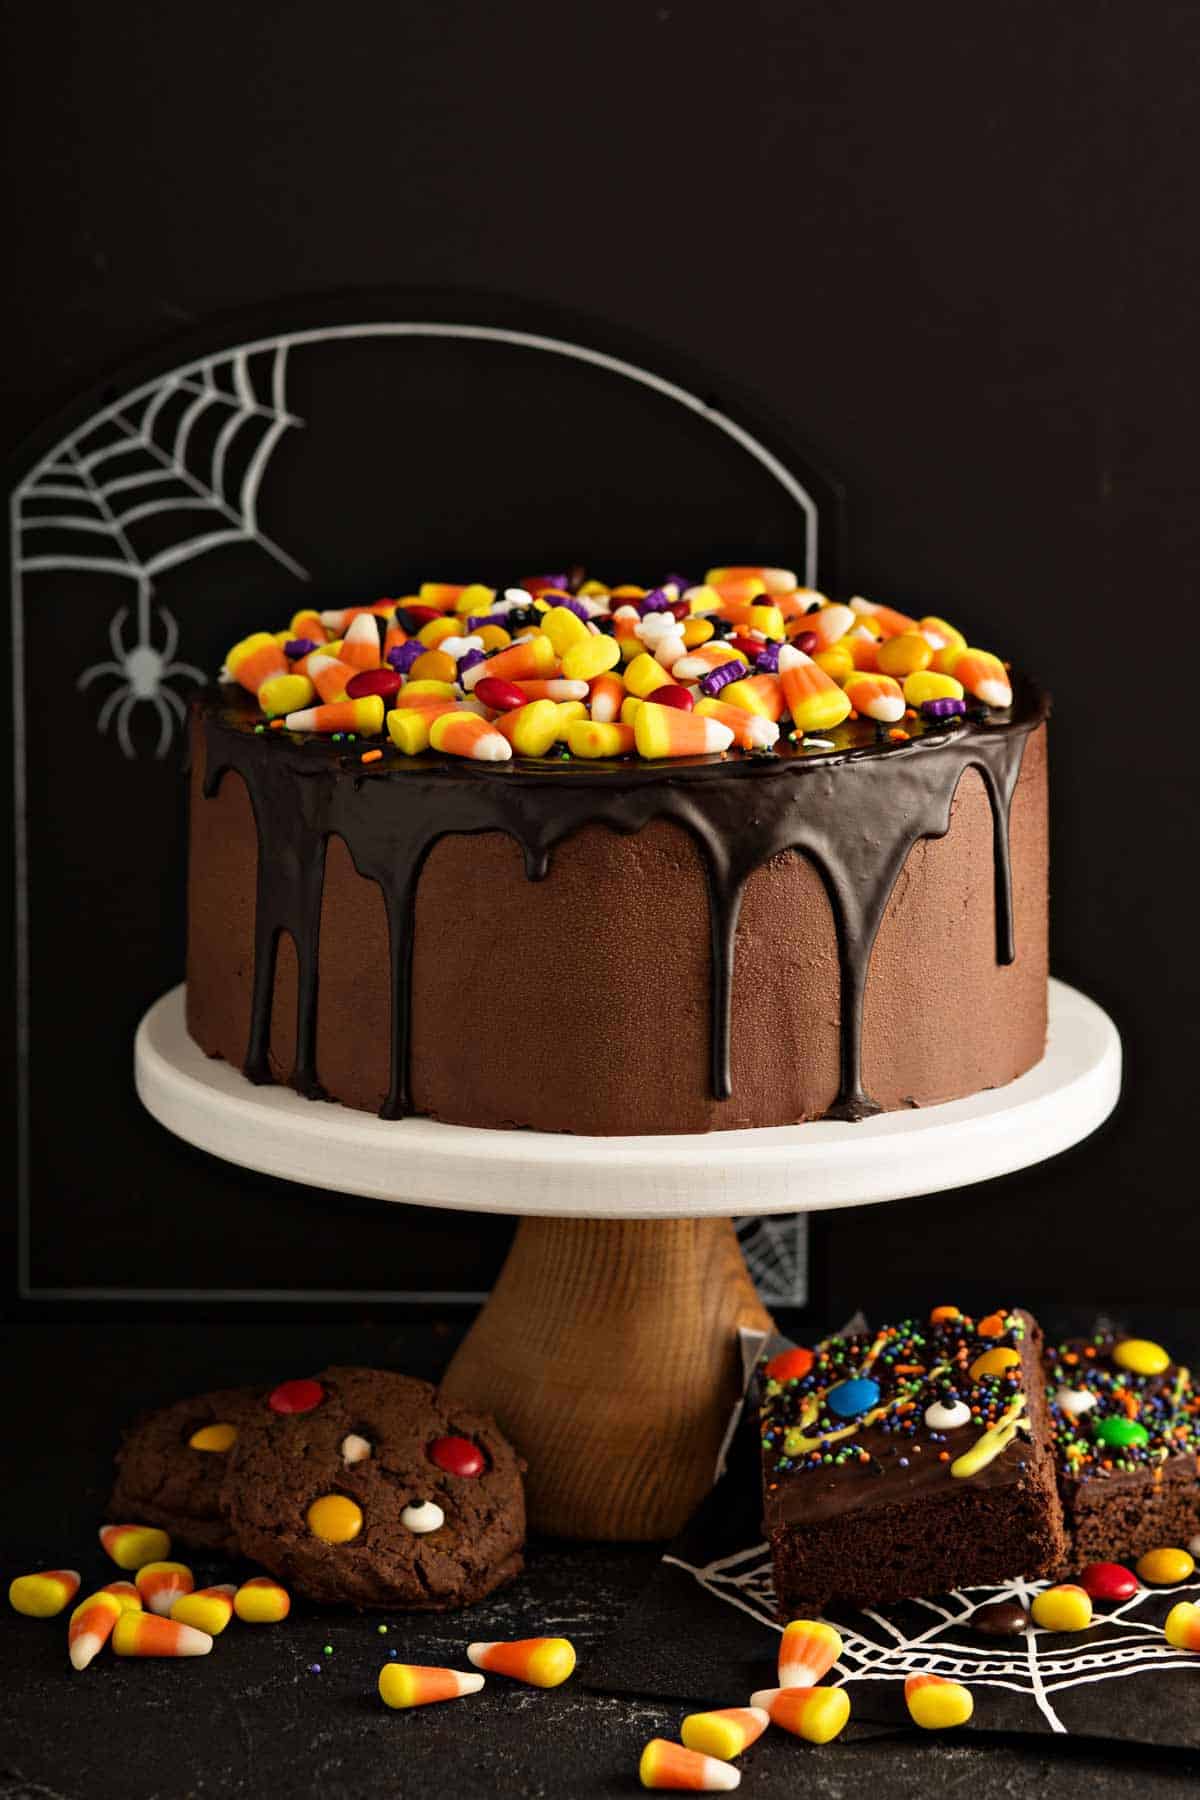 Chocolate Halloween cake decorated with candy corn and M&Ms with minimalist design.